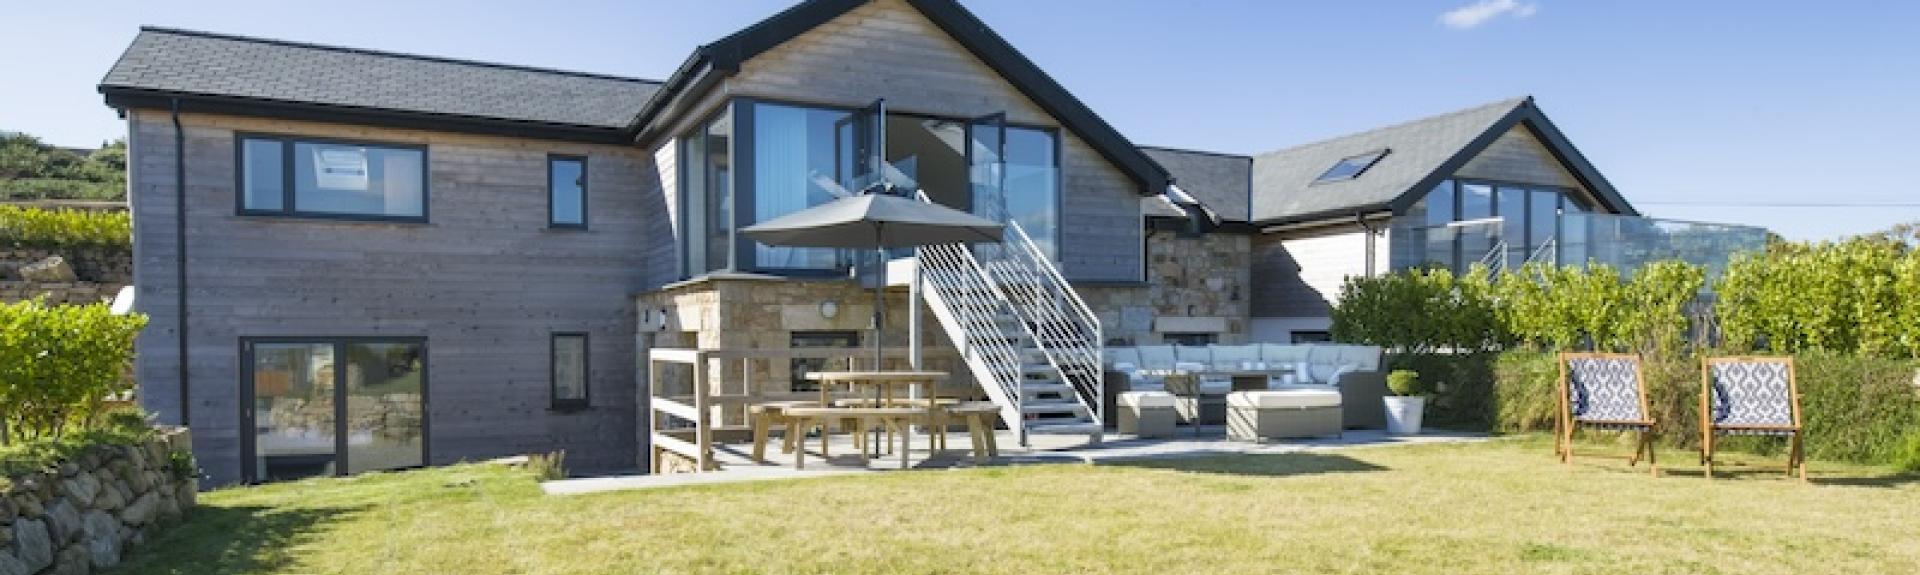 A large wooden eco-lodge over looks an equally large and secure lawn.